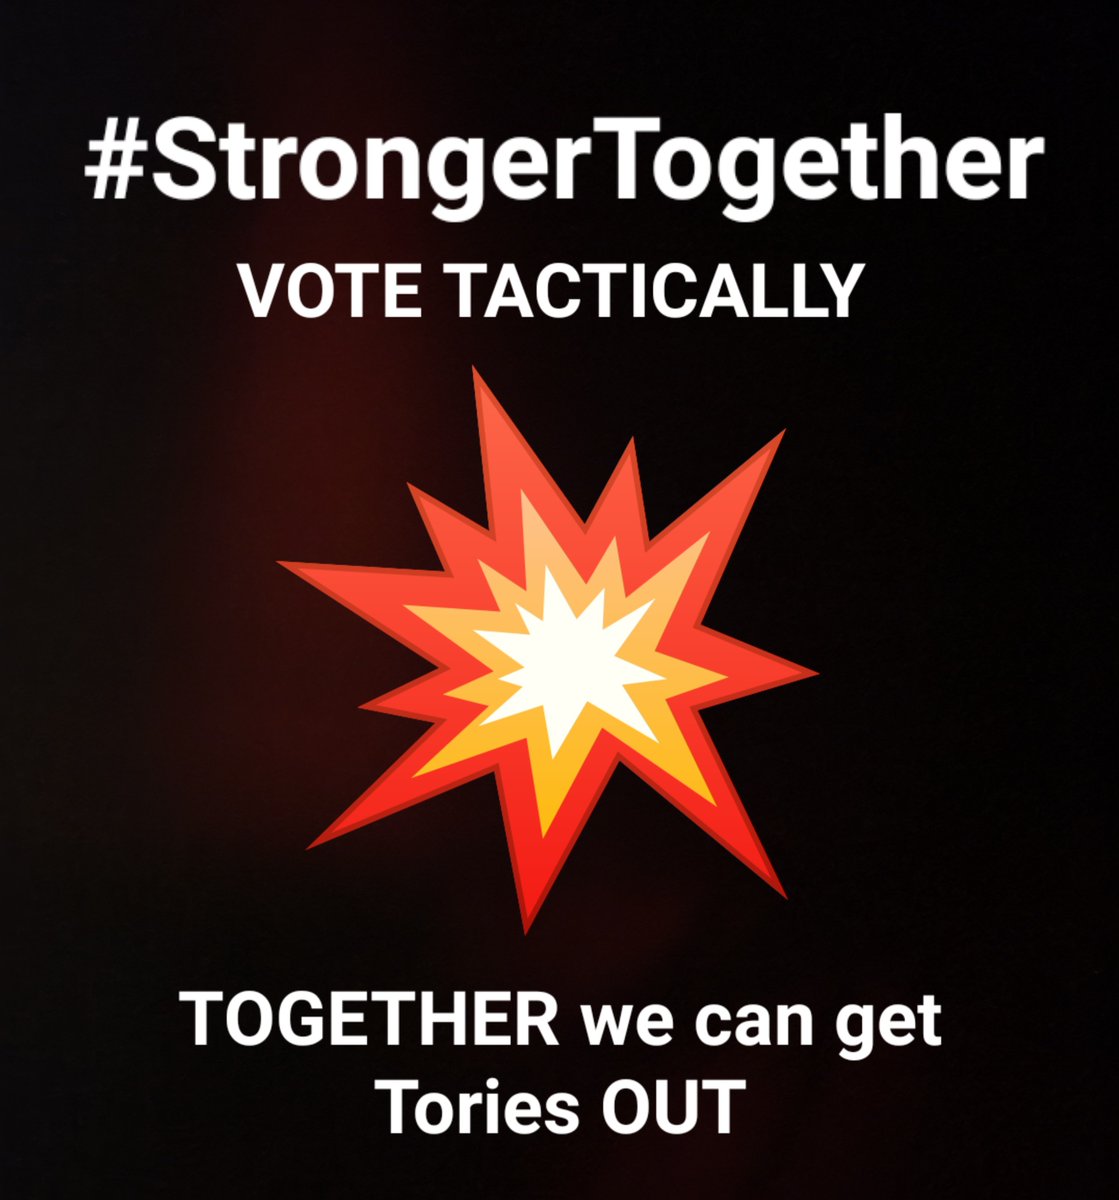 #ToriesOut662 
#GeneralElectionNow #JackanoryTorys 
#Bregret